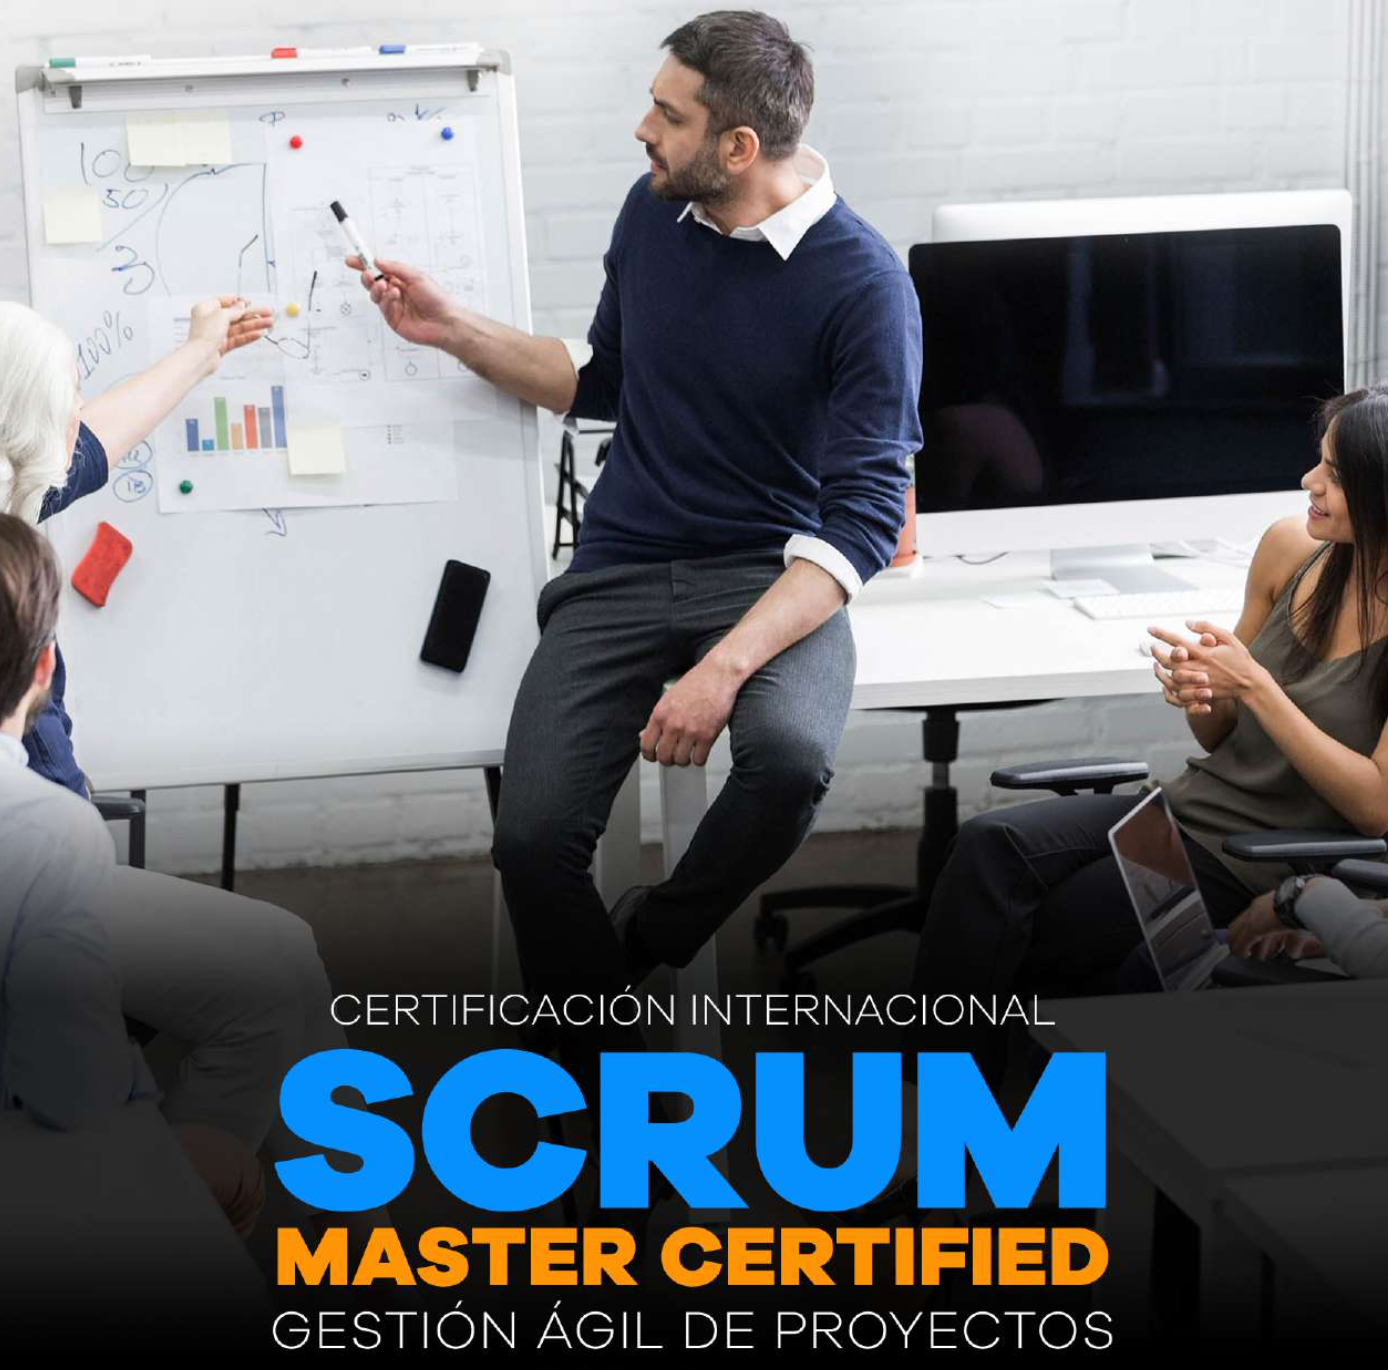 SCRUM Master Certified Professional Certification: Agile Project Management